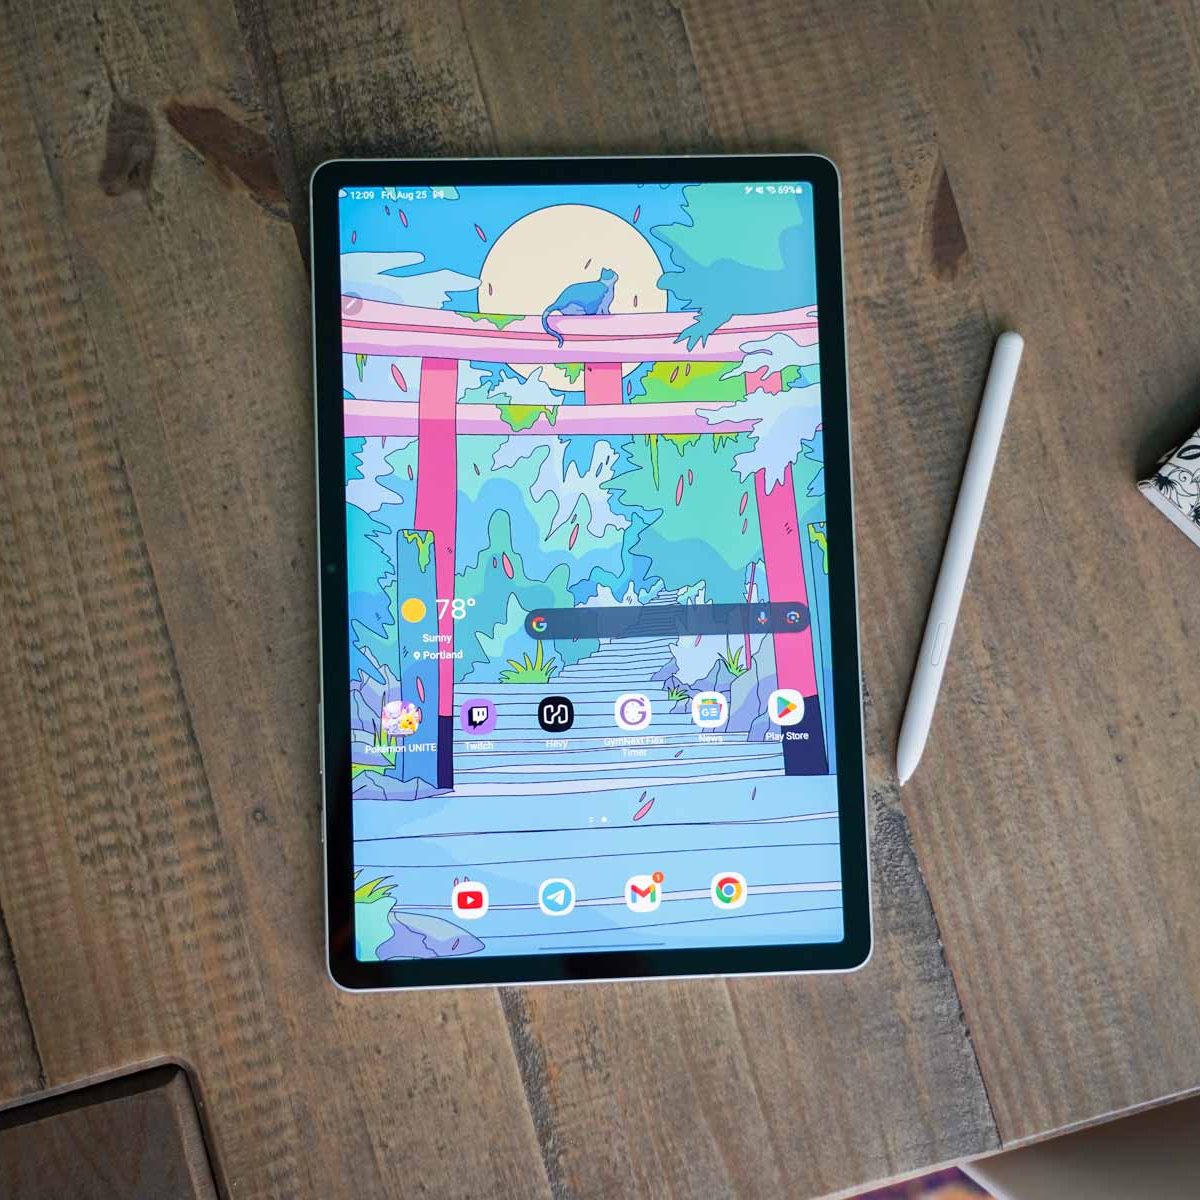 SamMobile: Galaxy Tab S9 FE+ hands-on: Our experience after a week of use :  r/GalaxyTab